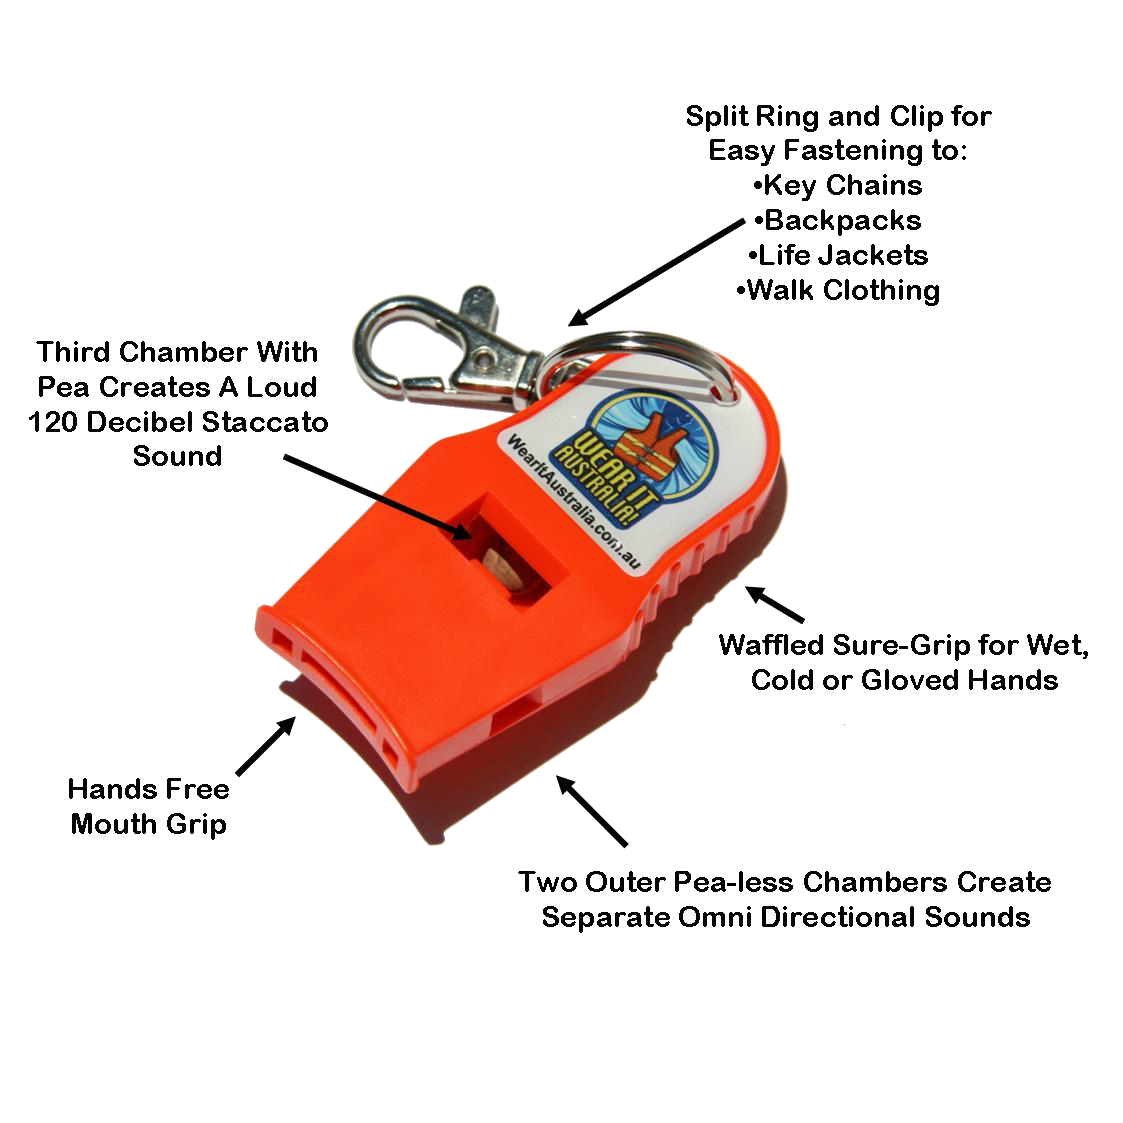 Whistles Emergency Loud Signal Distress Whistle Survival Plastic F4A6 